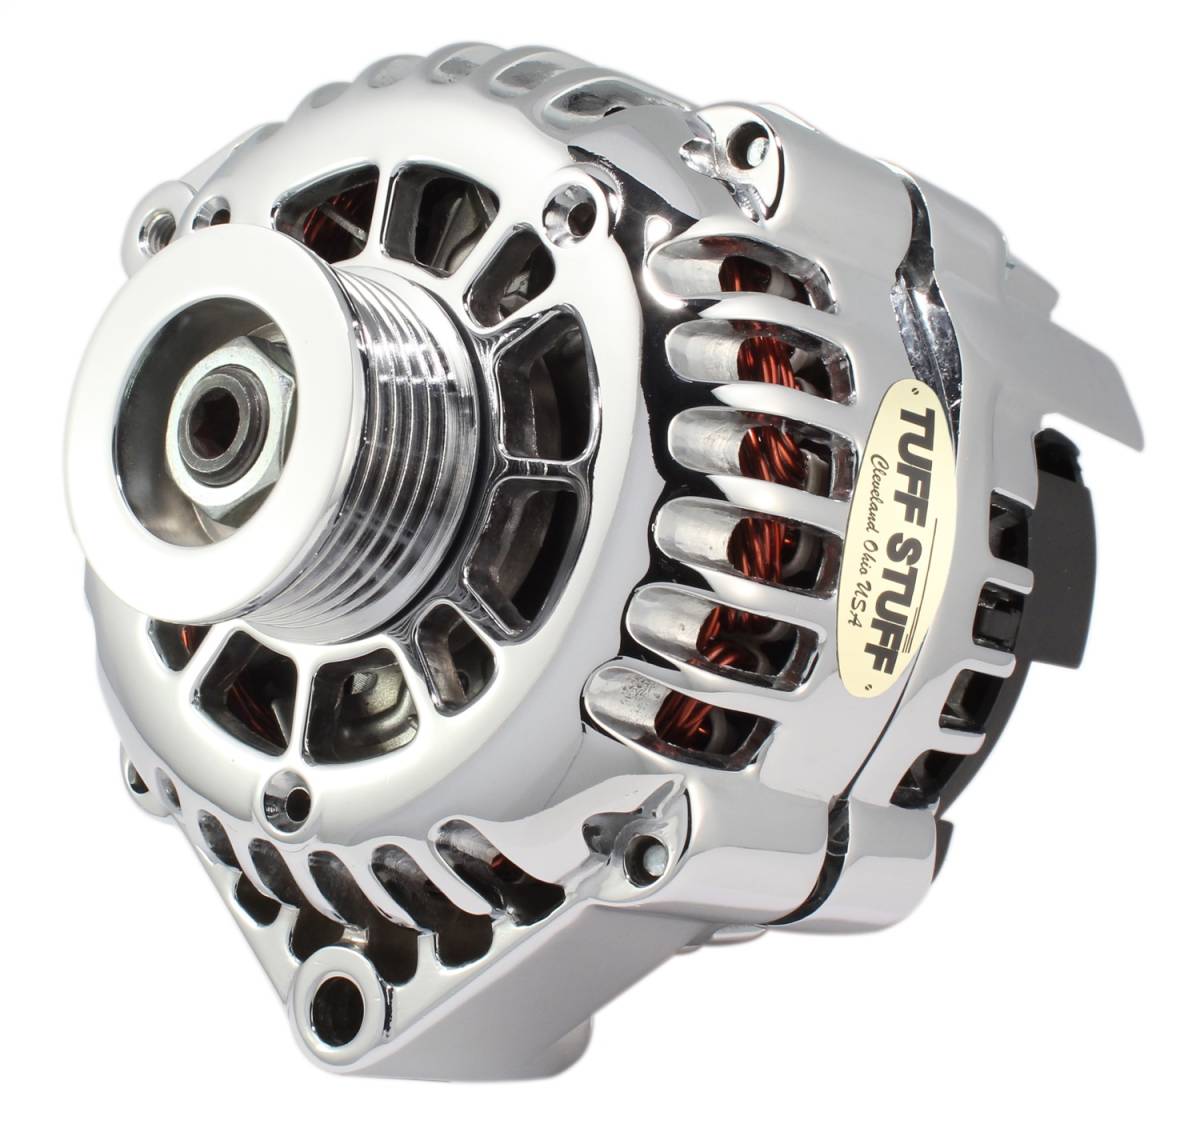 Tuff Stuff Performance - Alternator 175 AMP Upgrade Polished Aluminum 1-Wire Hookup Back Post 6 Groove Pulley 8233NCP1